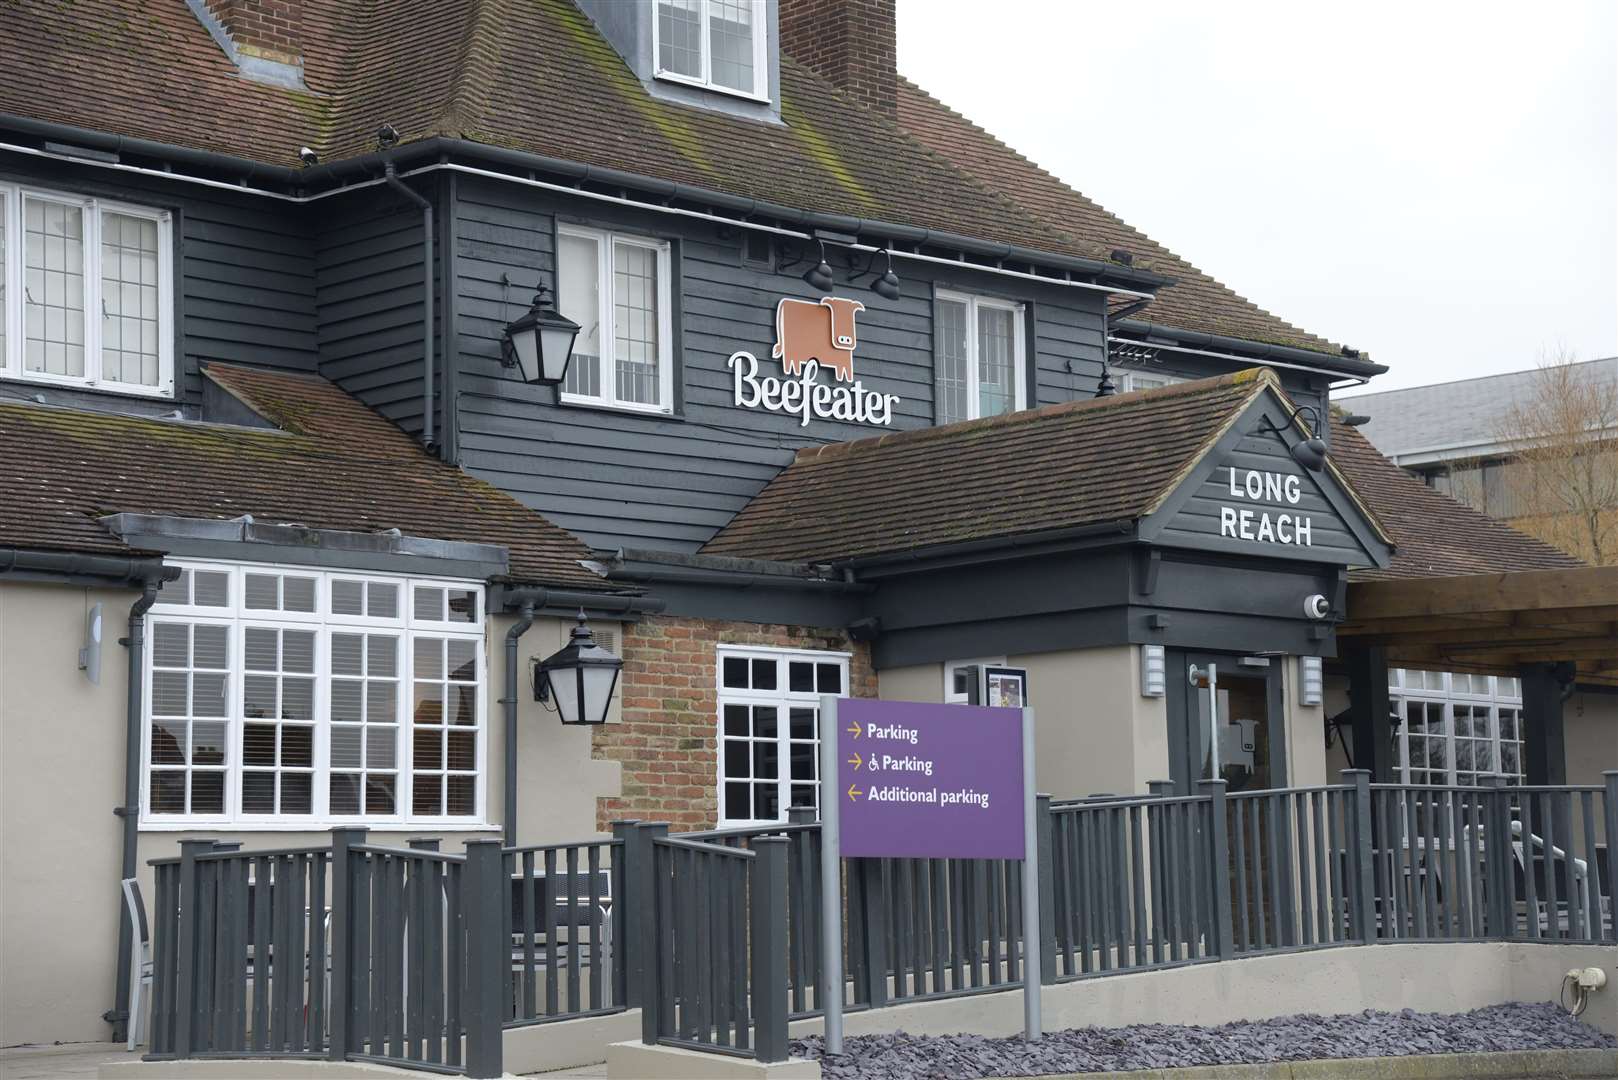 The Long Reach Beefeater restaurant at Whitstable. Picture: Chris Davey